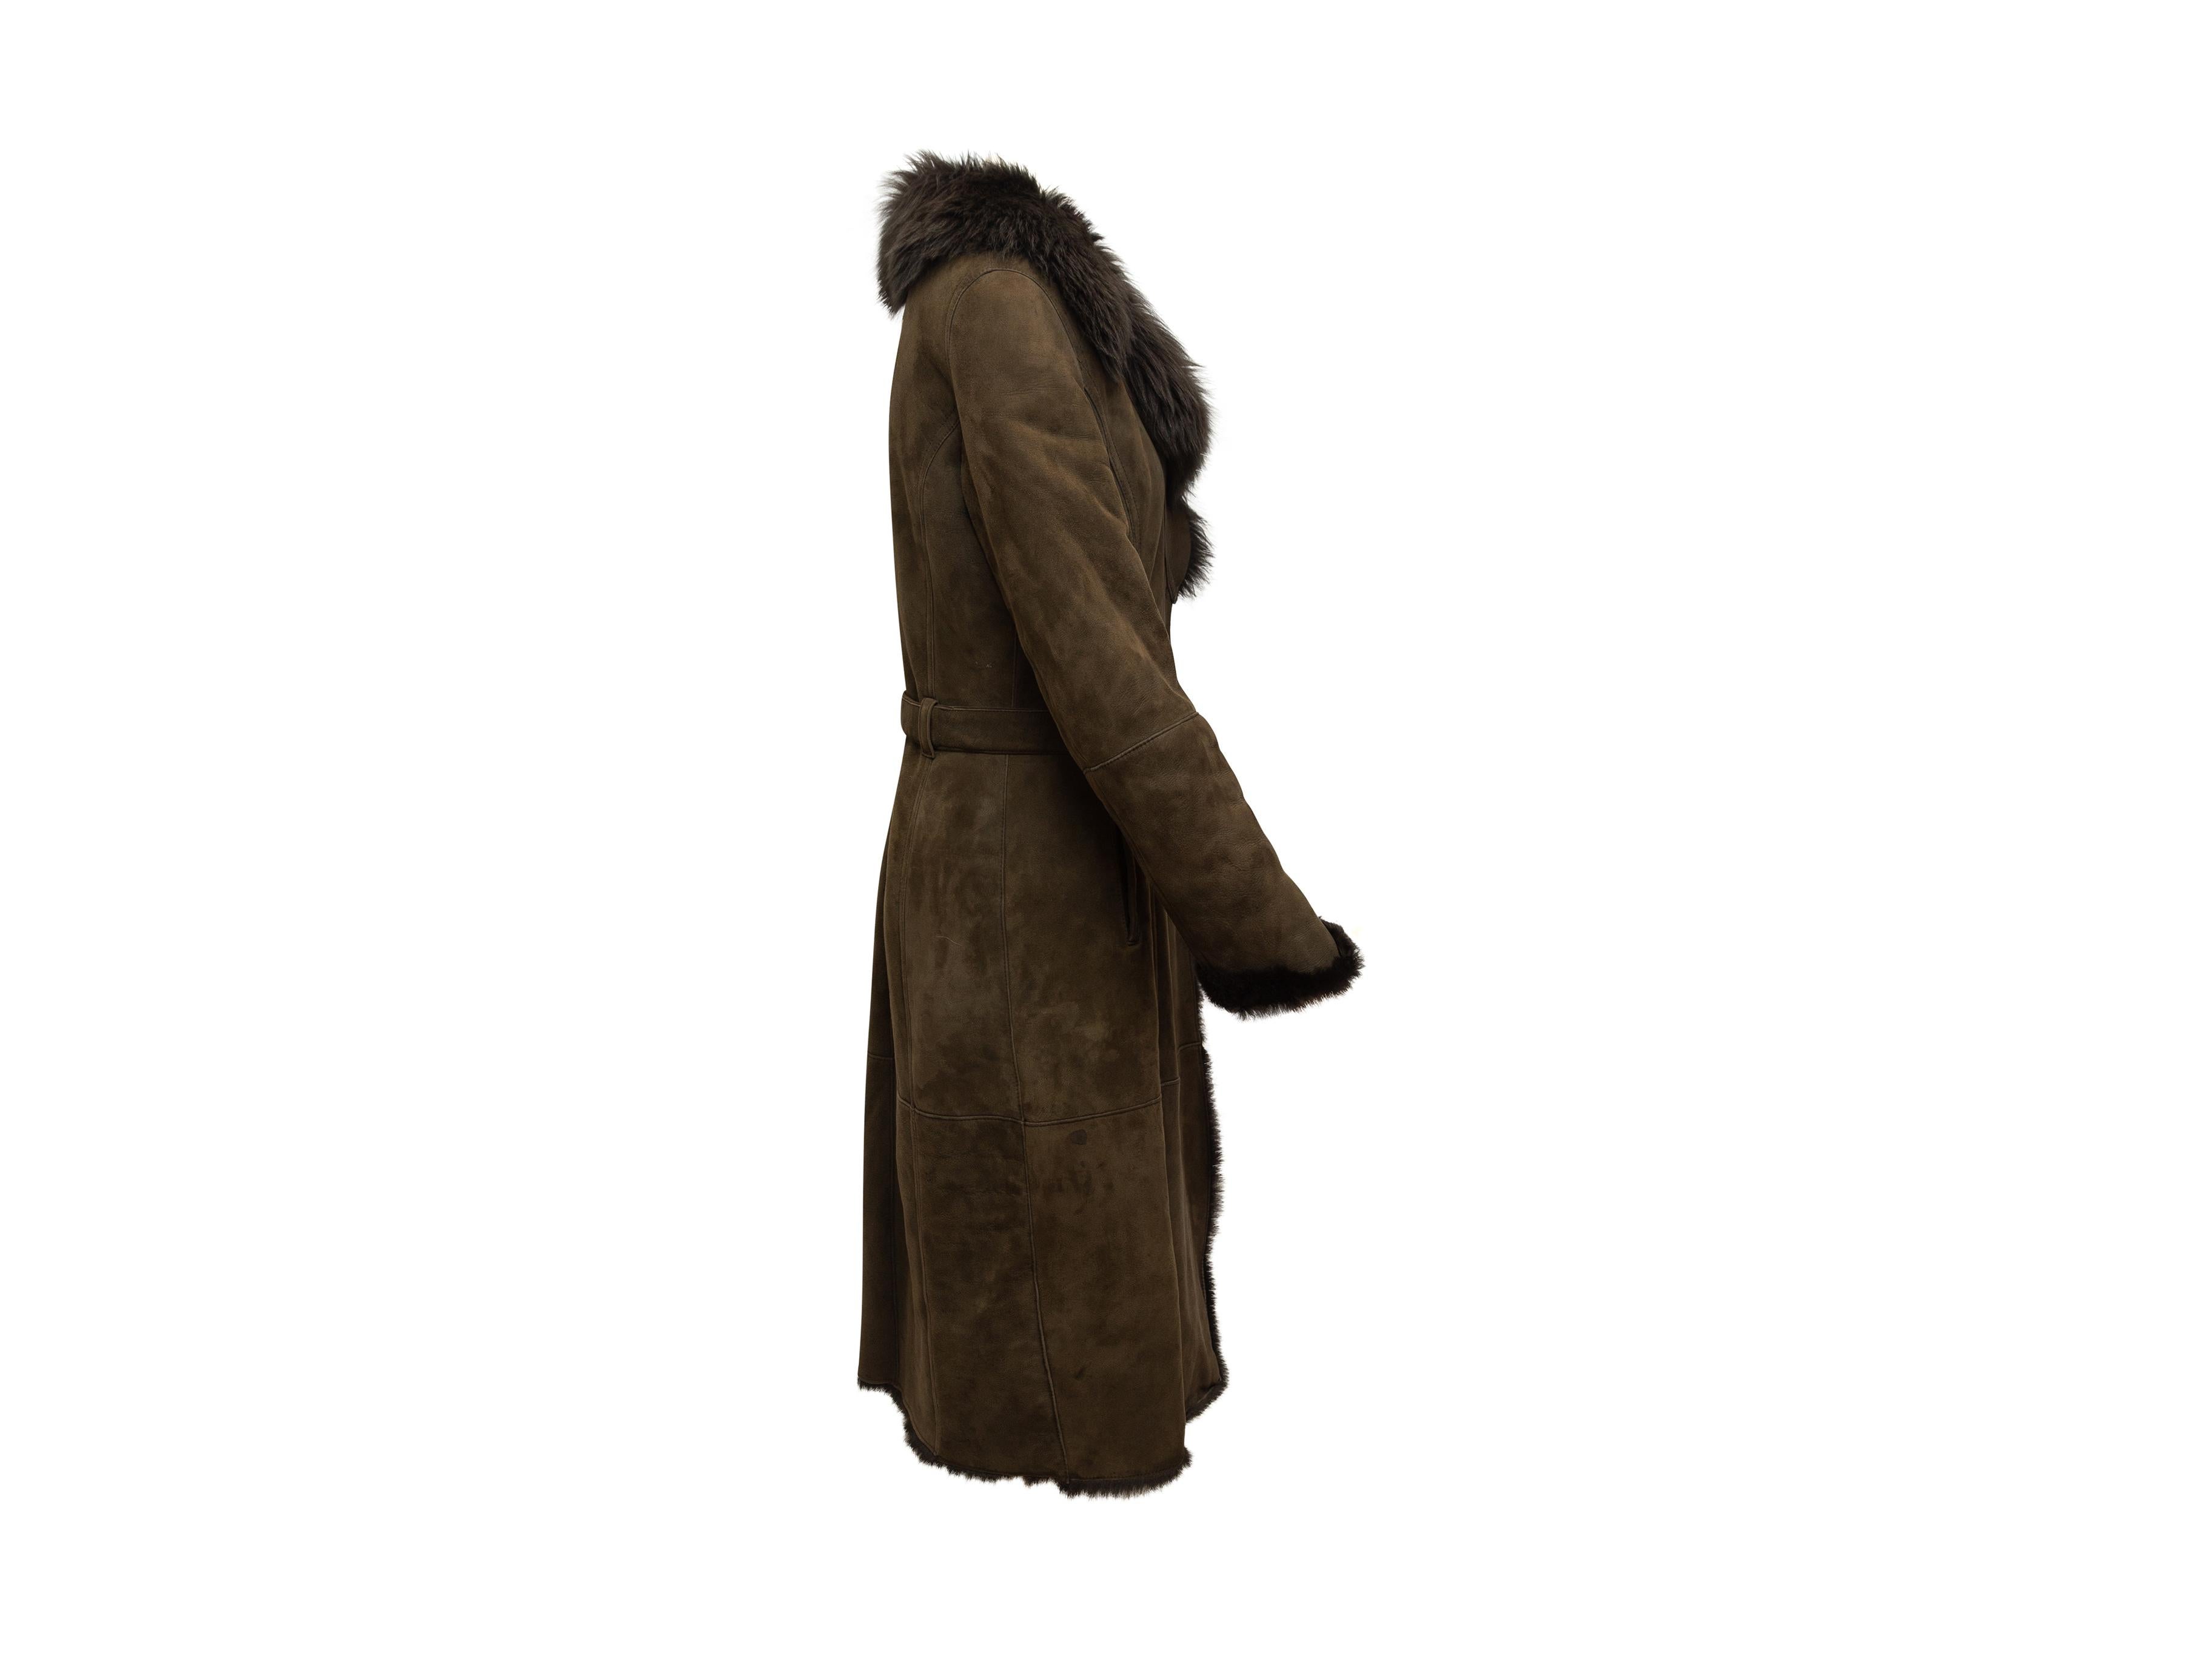 Product details: Brown long shearling coat by Joseph. Notched collar. Dual hip pockets. Belt at waist. 37